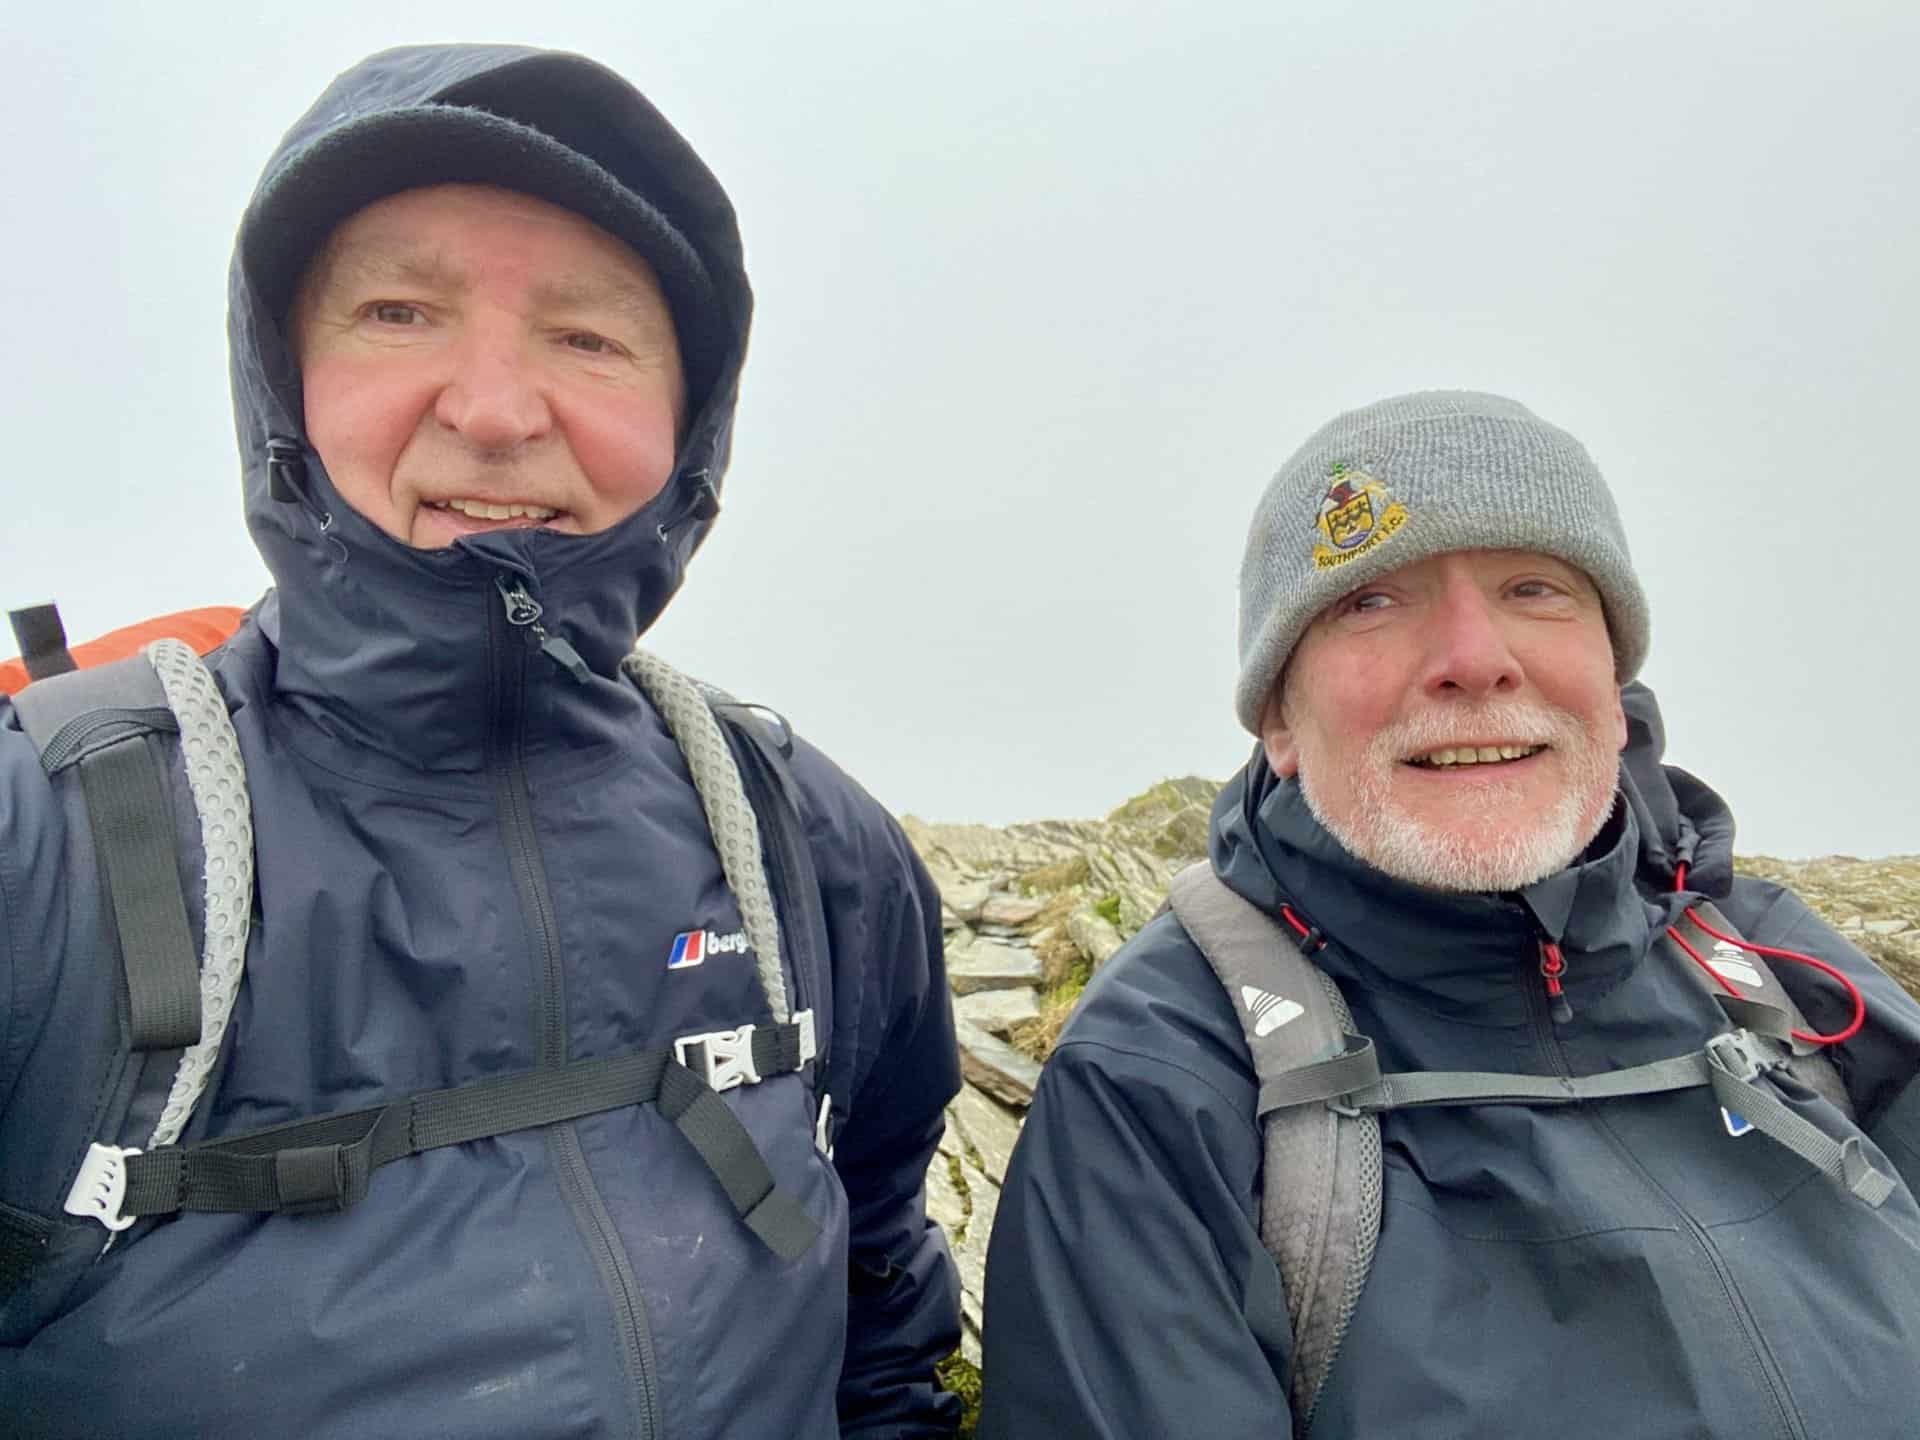 Mike and I on the summit of Grisedale Pike, height 791 metres (2593 feet). We're only about a quarter of the way round our Grisedale Pike walk and it's extremely windy.